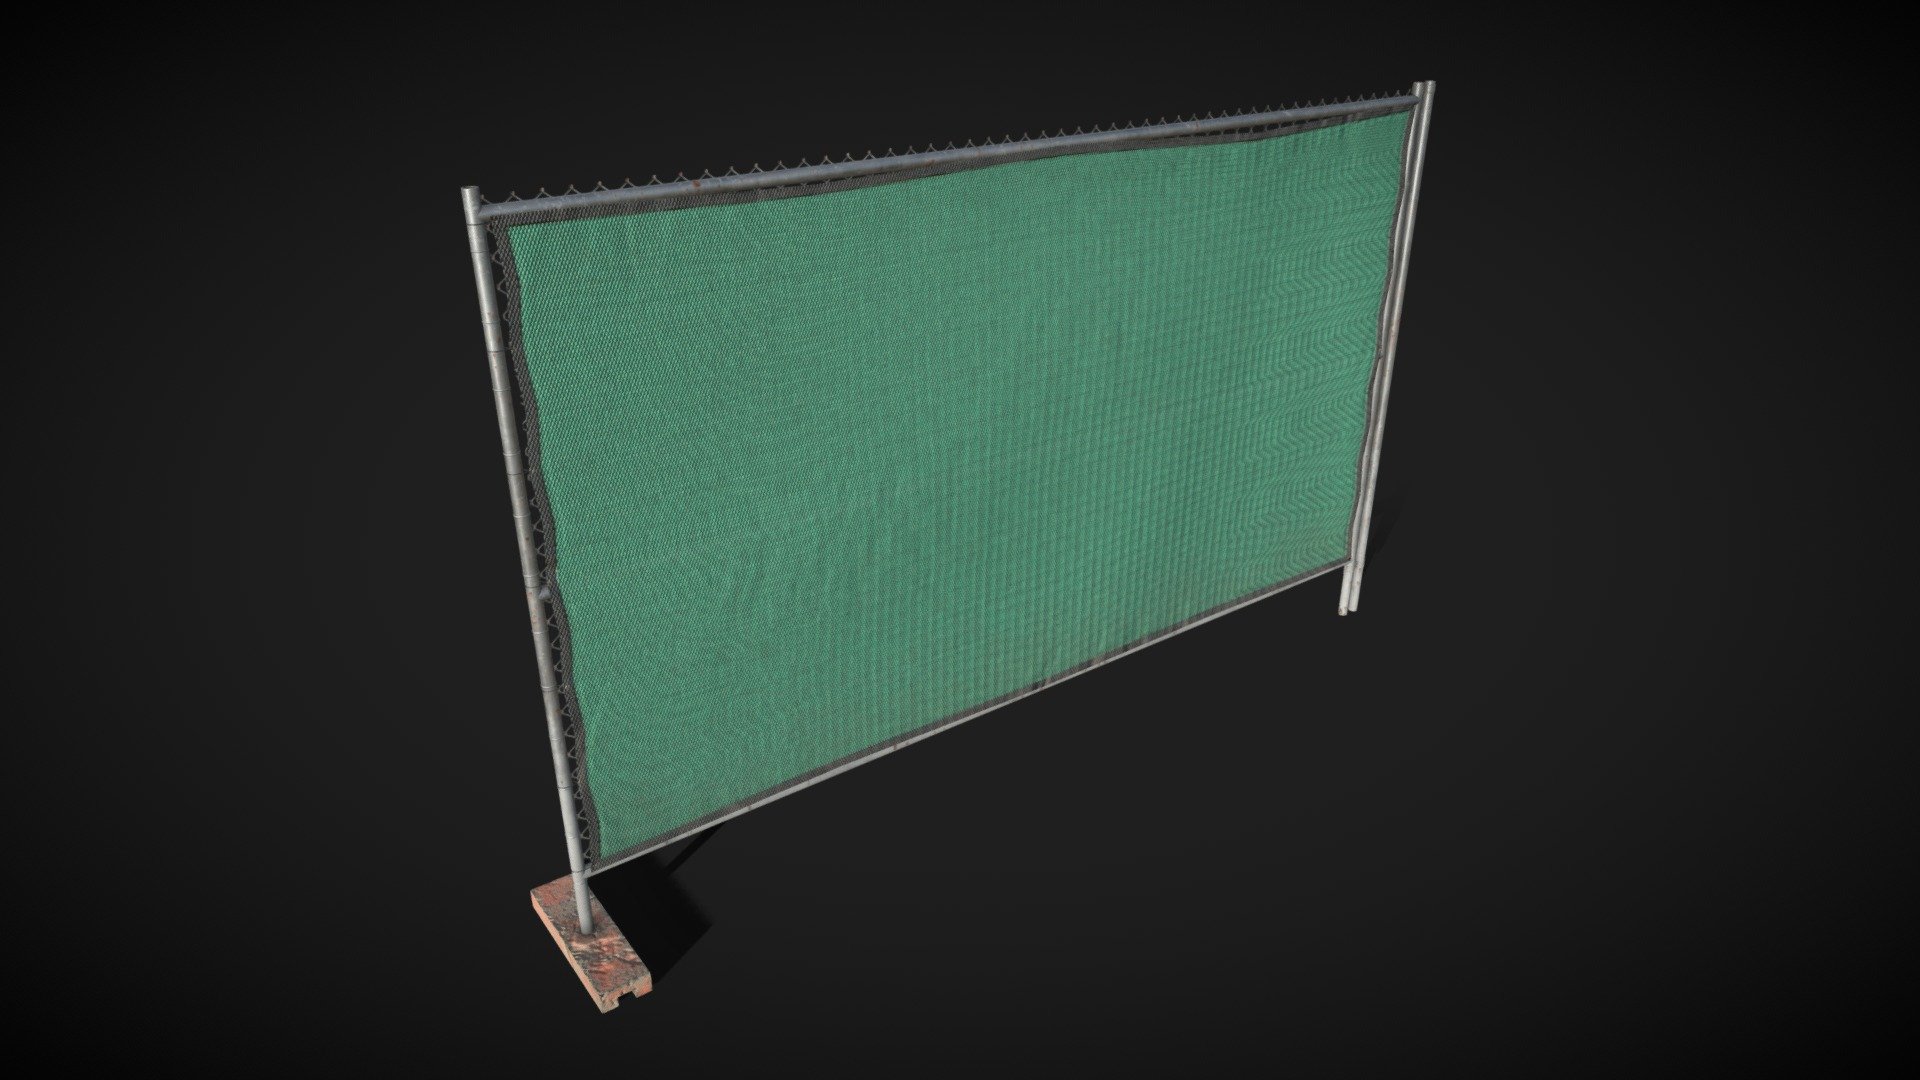 These modular Fences with privacy screens are the most economical solution to provide the privacy you need and a clean look for any fencing areas. The long and tall Privacy fence screen is ideal for commercial and residential fences needing a combination of privacy, air flow. Perfect for construction sites, special events, back yards, or fence barriers, and it is a perfect complement to 3D landscapes and residential backyards 3d model